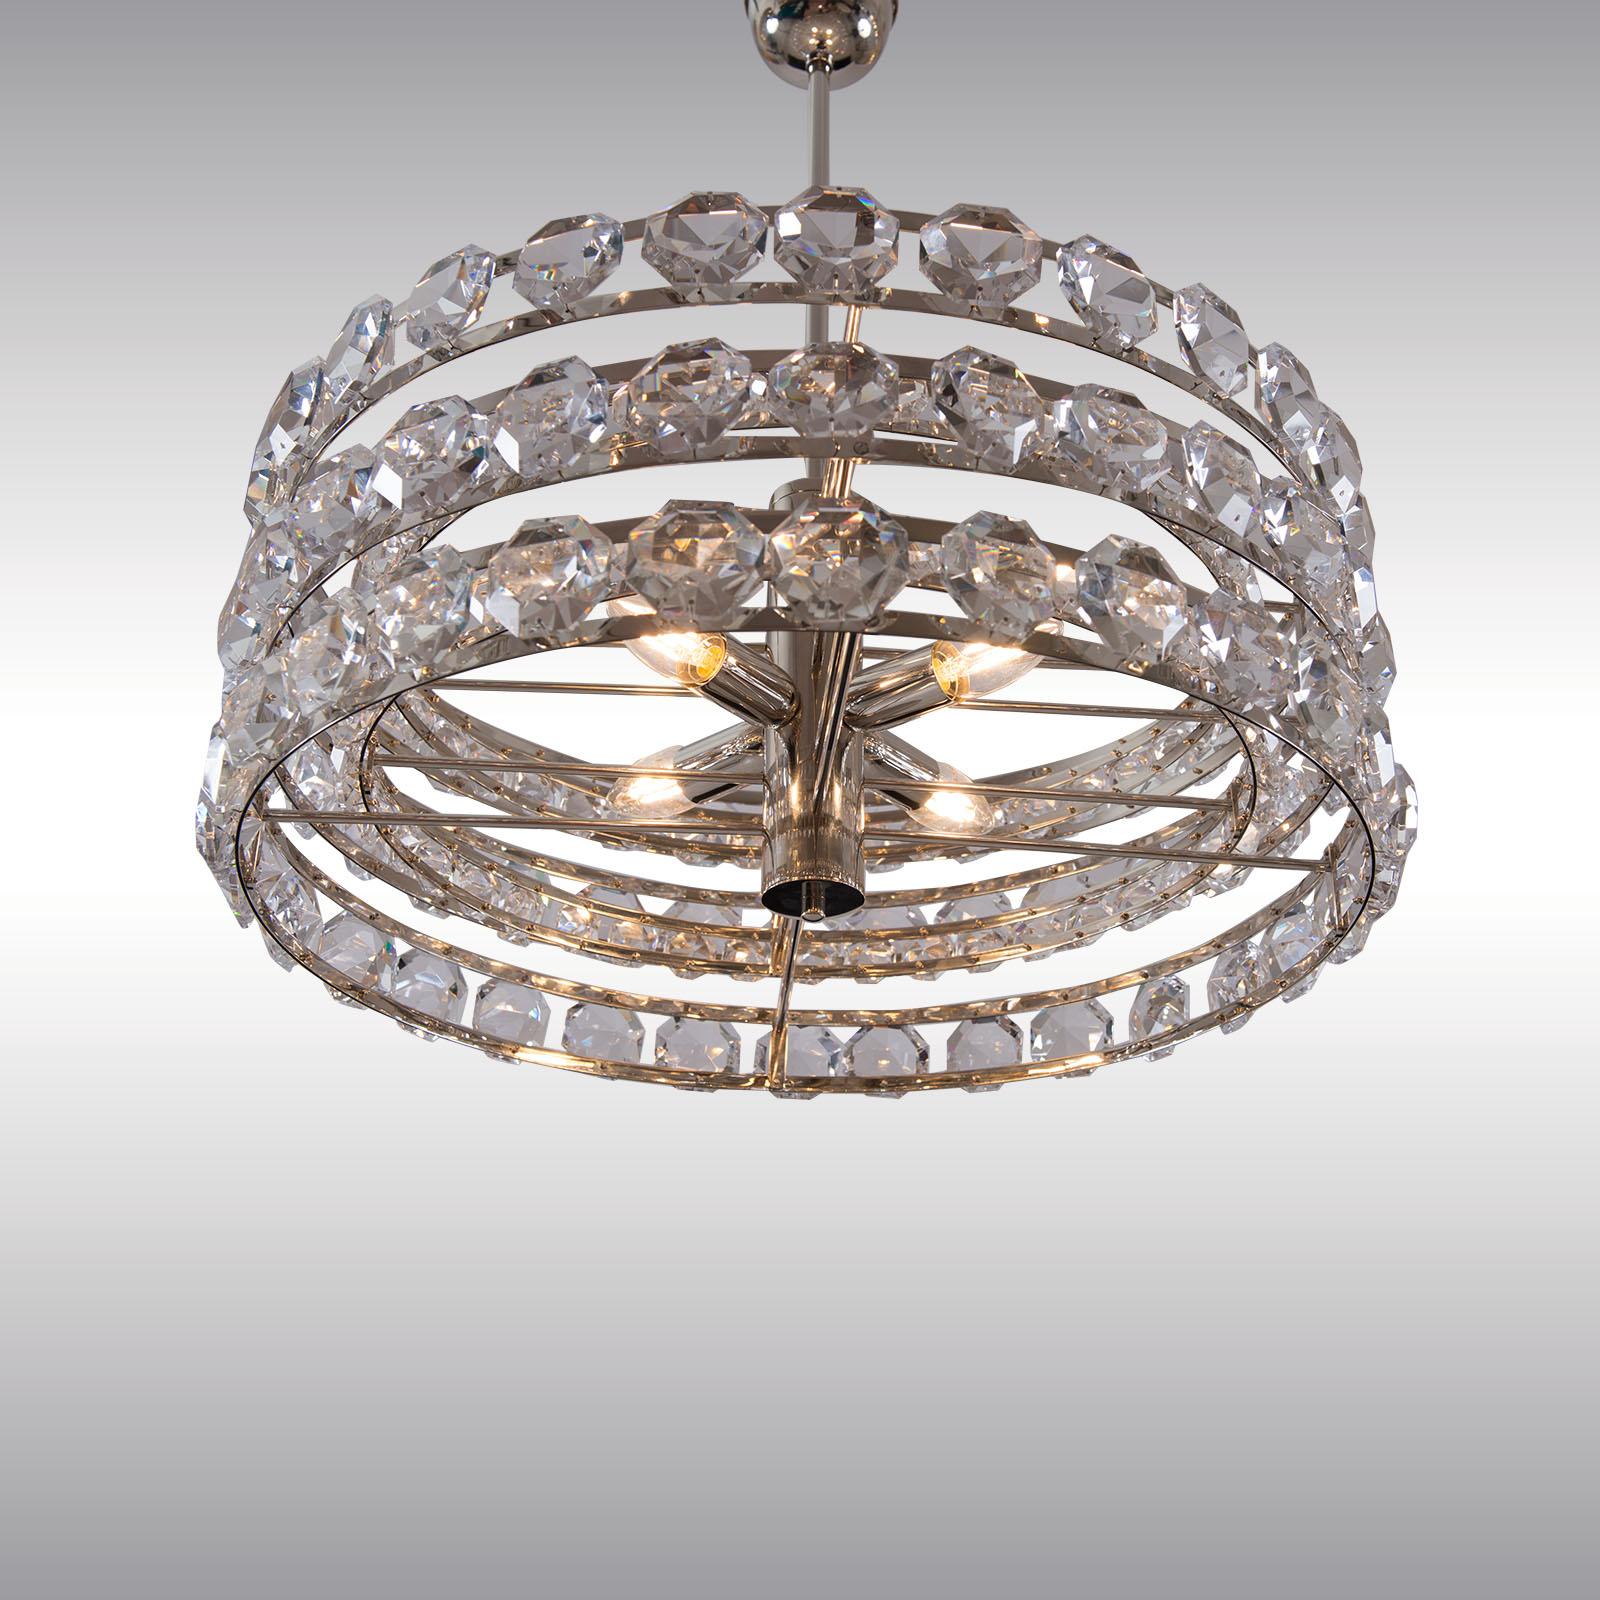 Contemporary Mid-Century Modern Style Crystal Chandelier, Re Edition For Sale